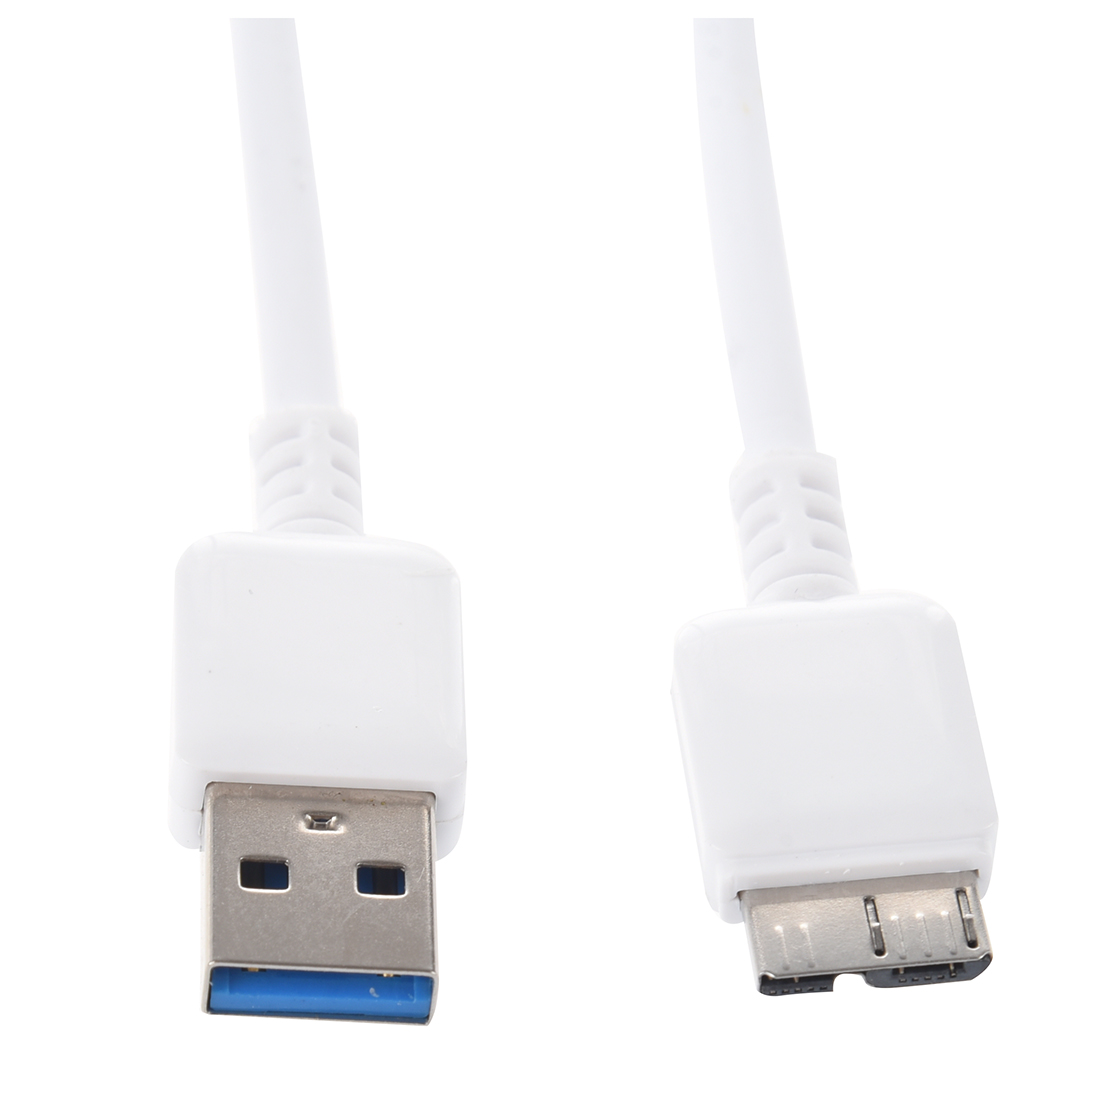 White Superspeed USB 3.0 Type A Male to Micro B Male Adapter Cable Cord
